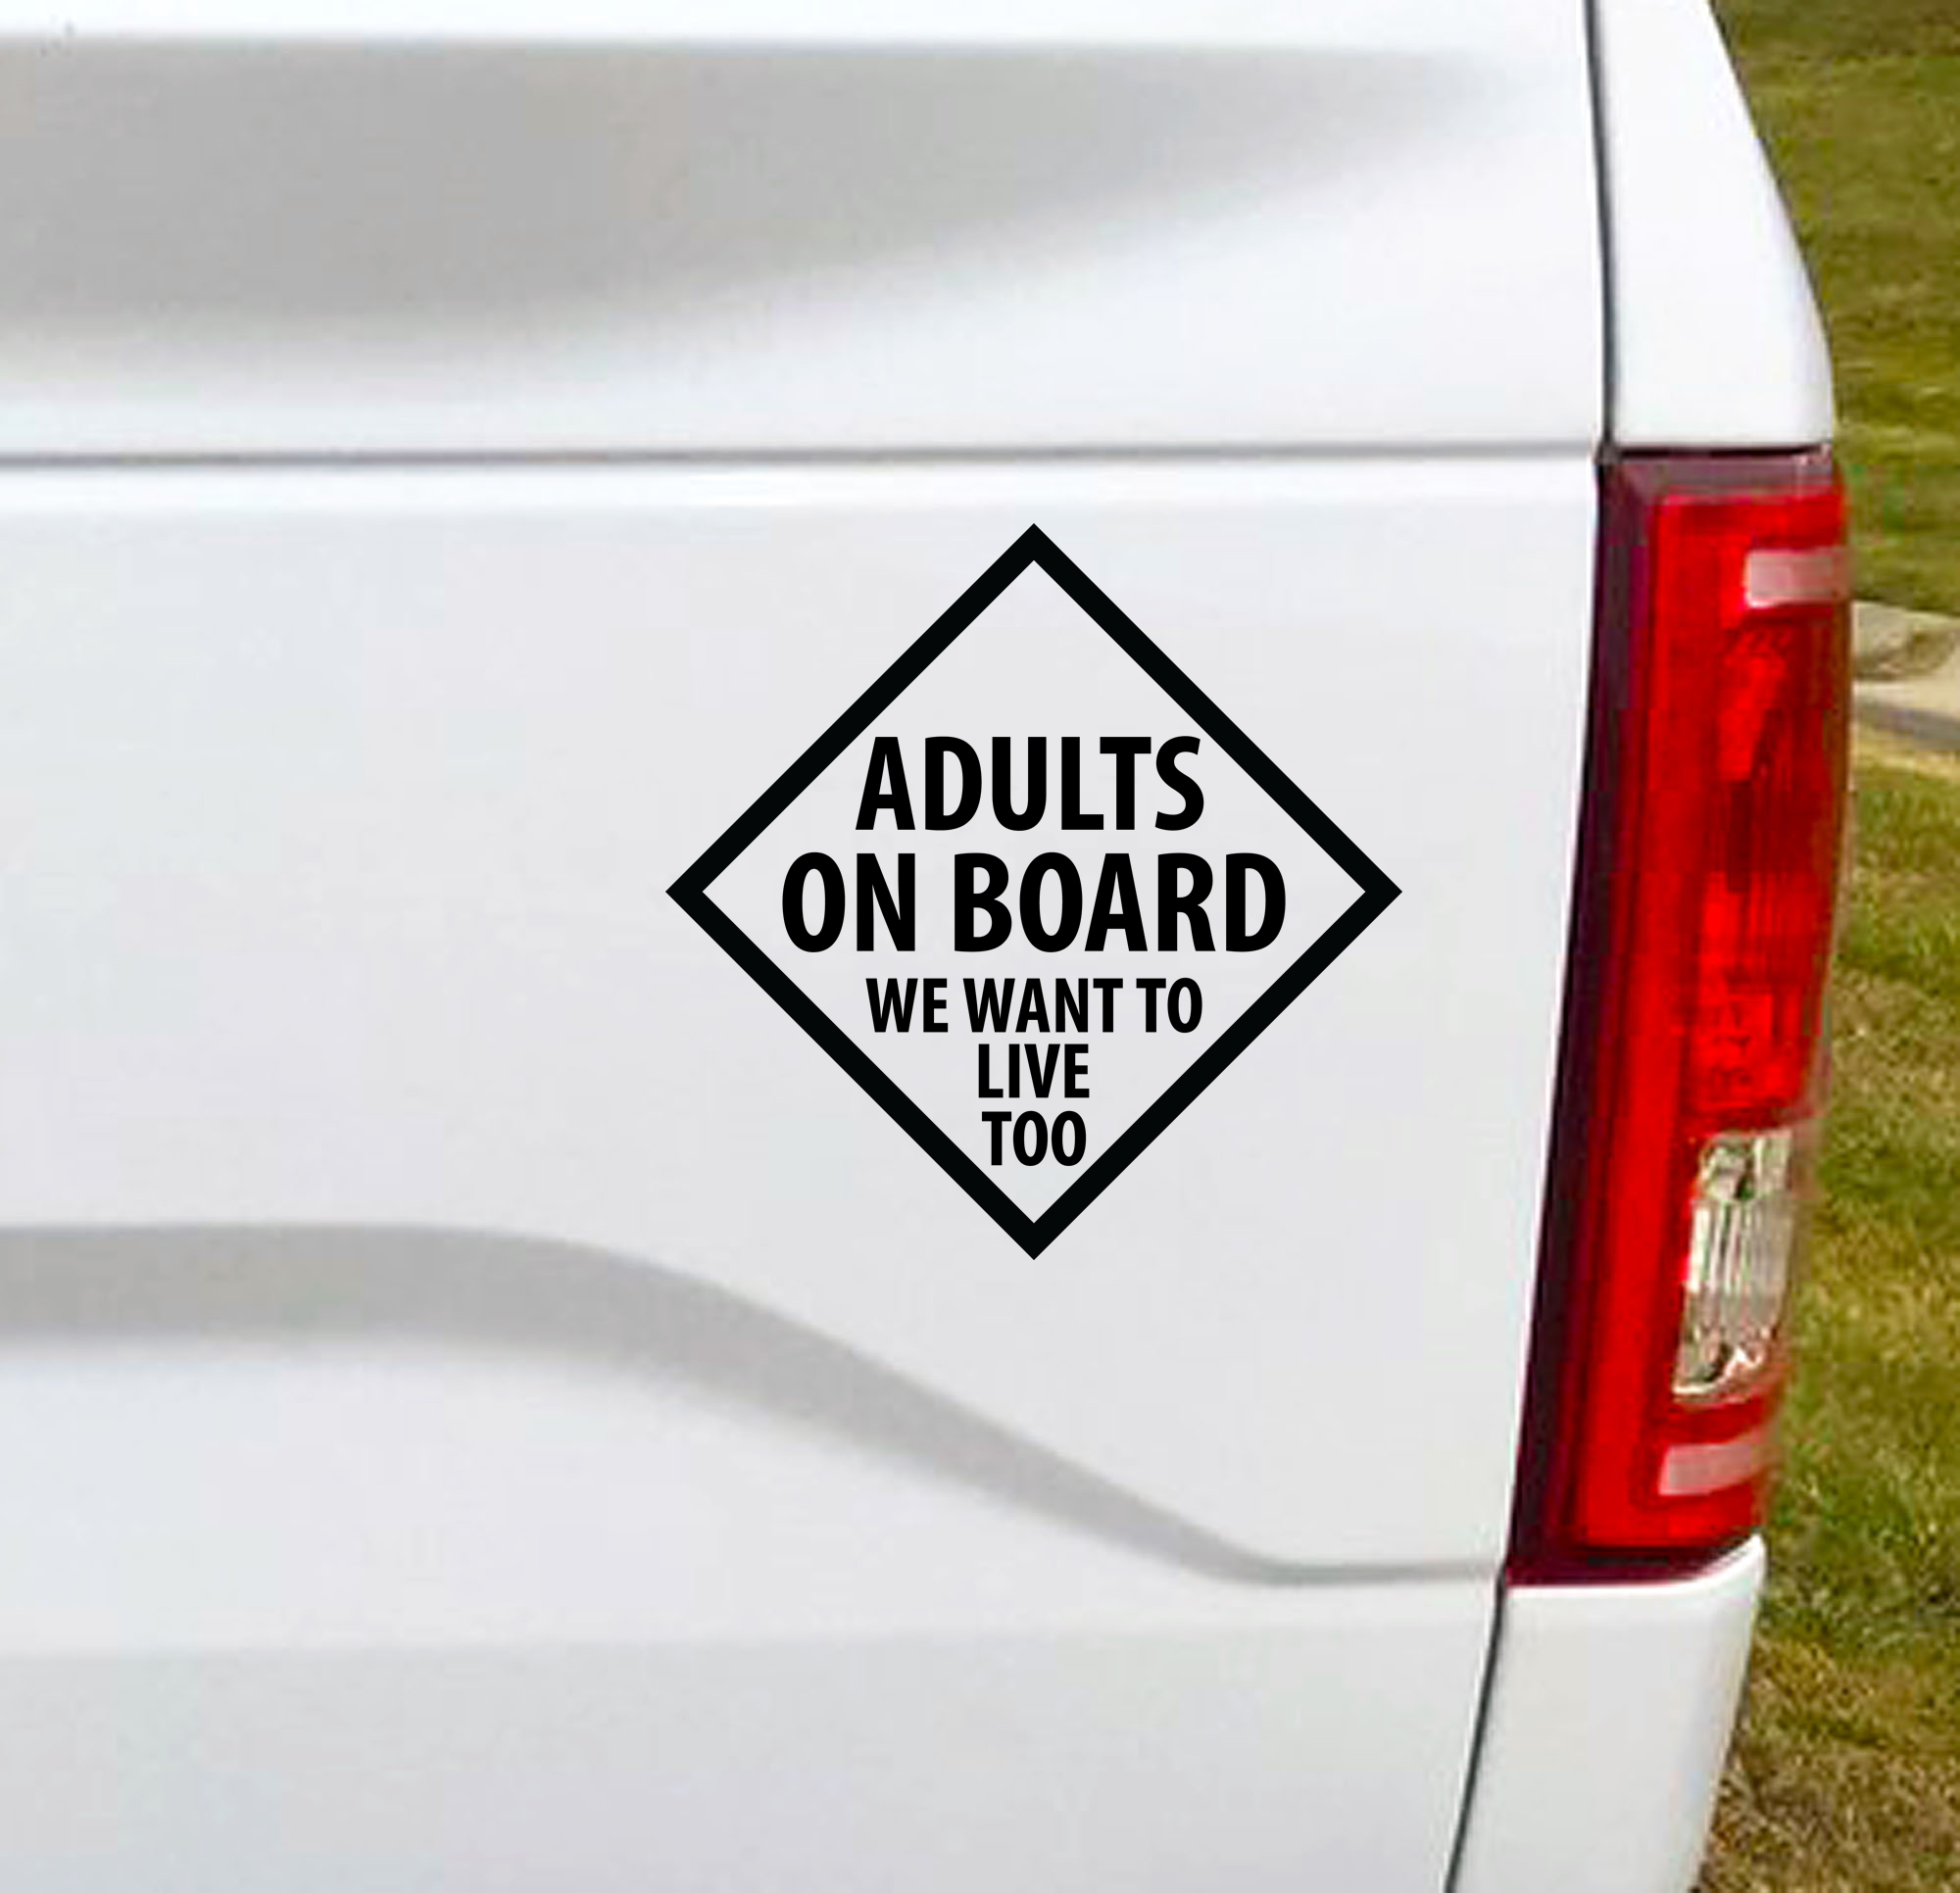 This Adults on Board car decal will inform your fellow drivers that you have precious cargo on board...YOU! Hopefully it makes them rethink how close they are driving behind you.  5"W x 5"H Car Decal, Car Sticker, Car Vinyl, Bumper Sticker, Vinyl Stickers, Vinyl Sticker.